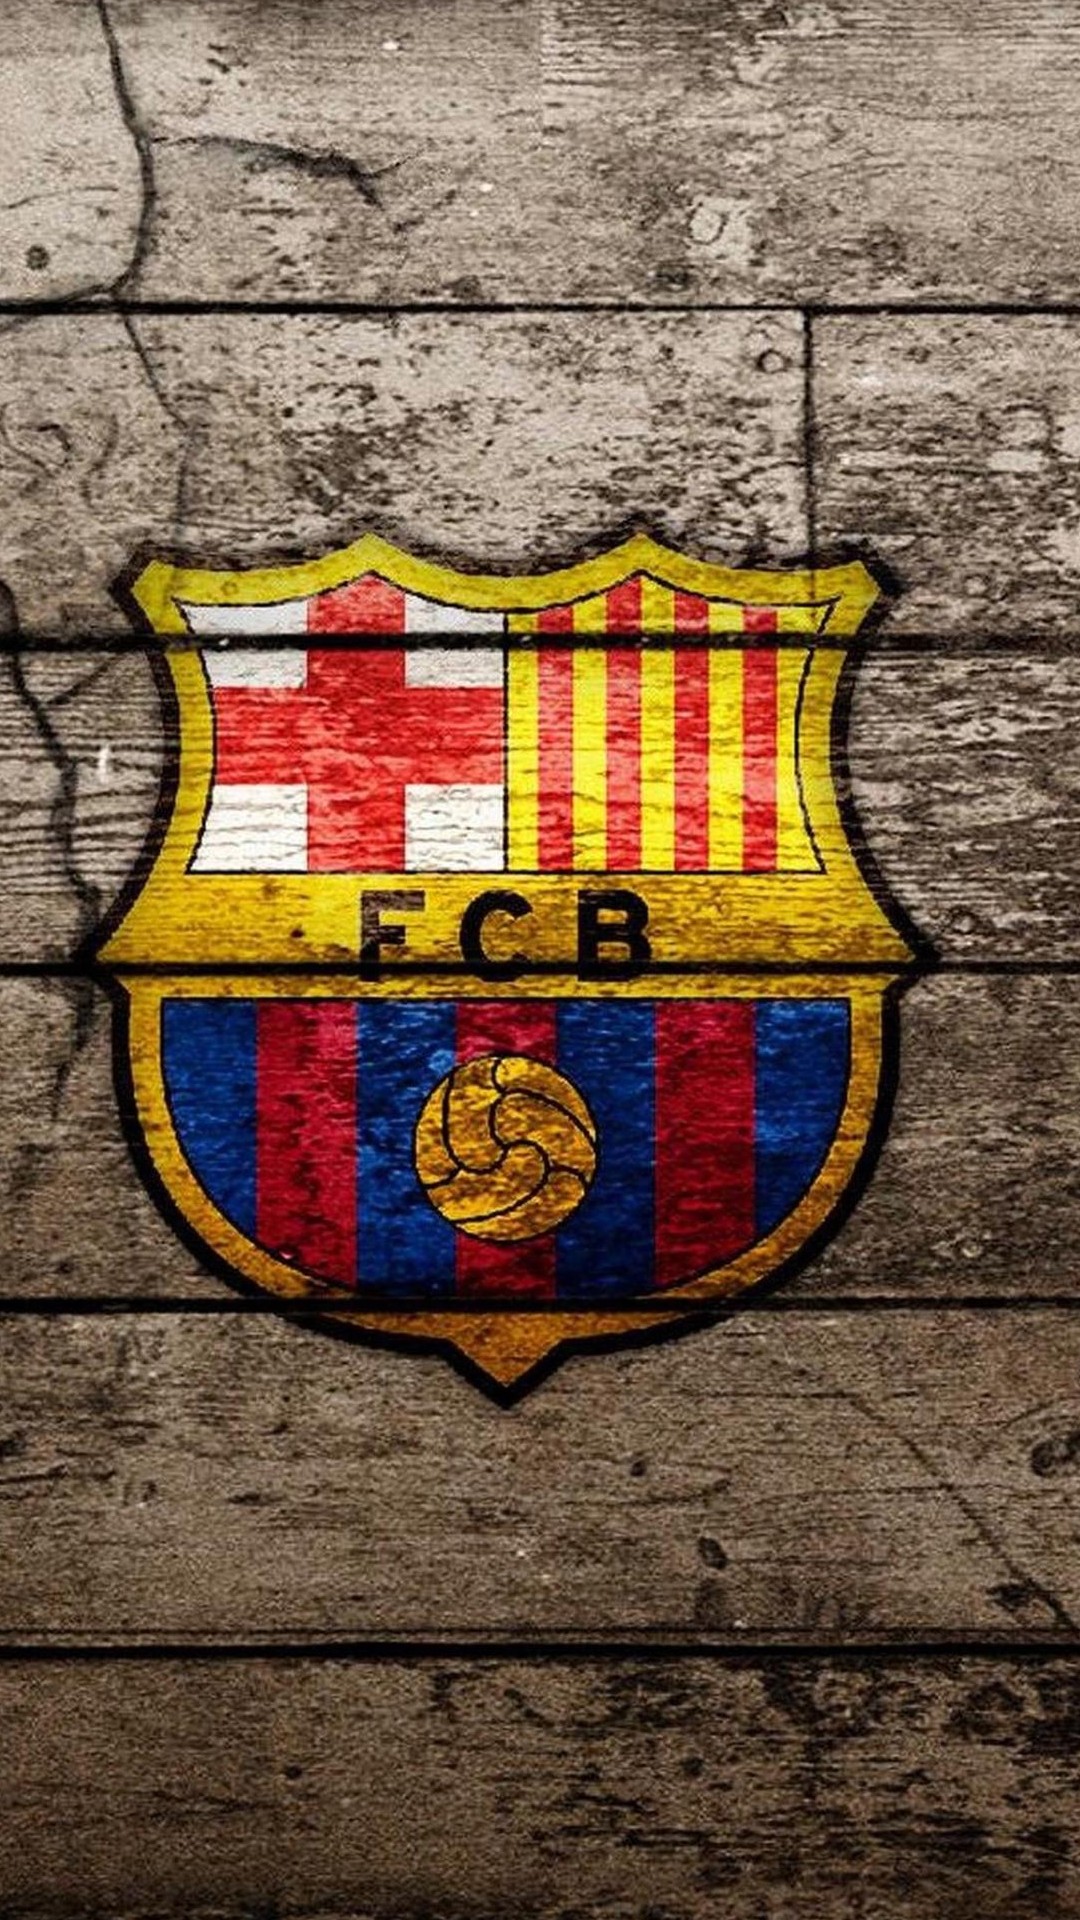 Fc Barcelona Hd Wallpapers For Mobile